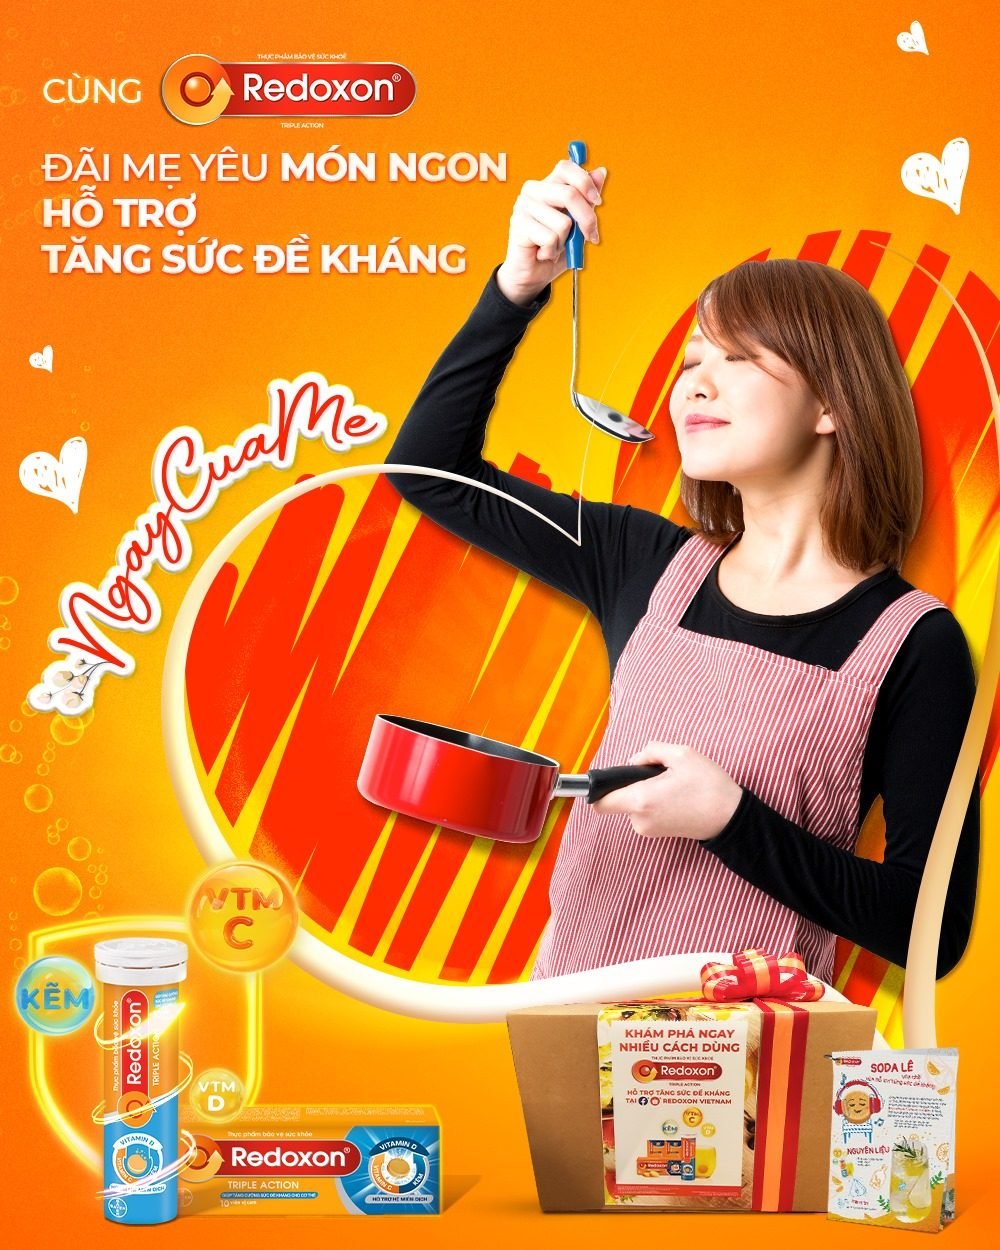 Body image for Vietnamese vitamin supplement rebrands as cooking ingredient